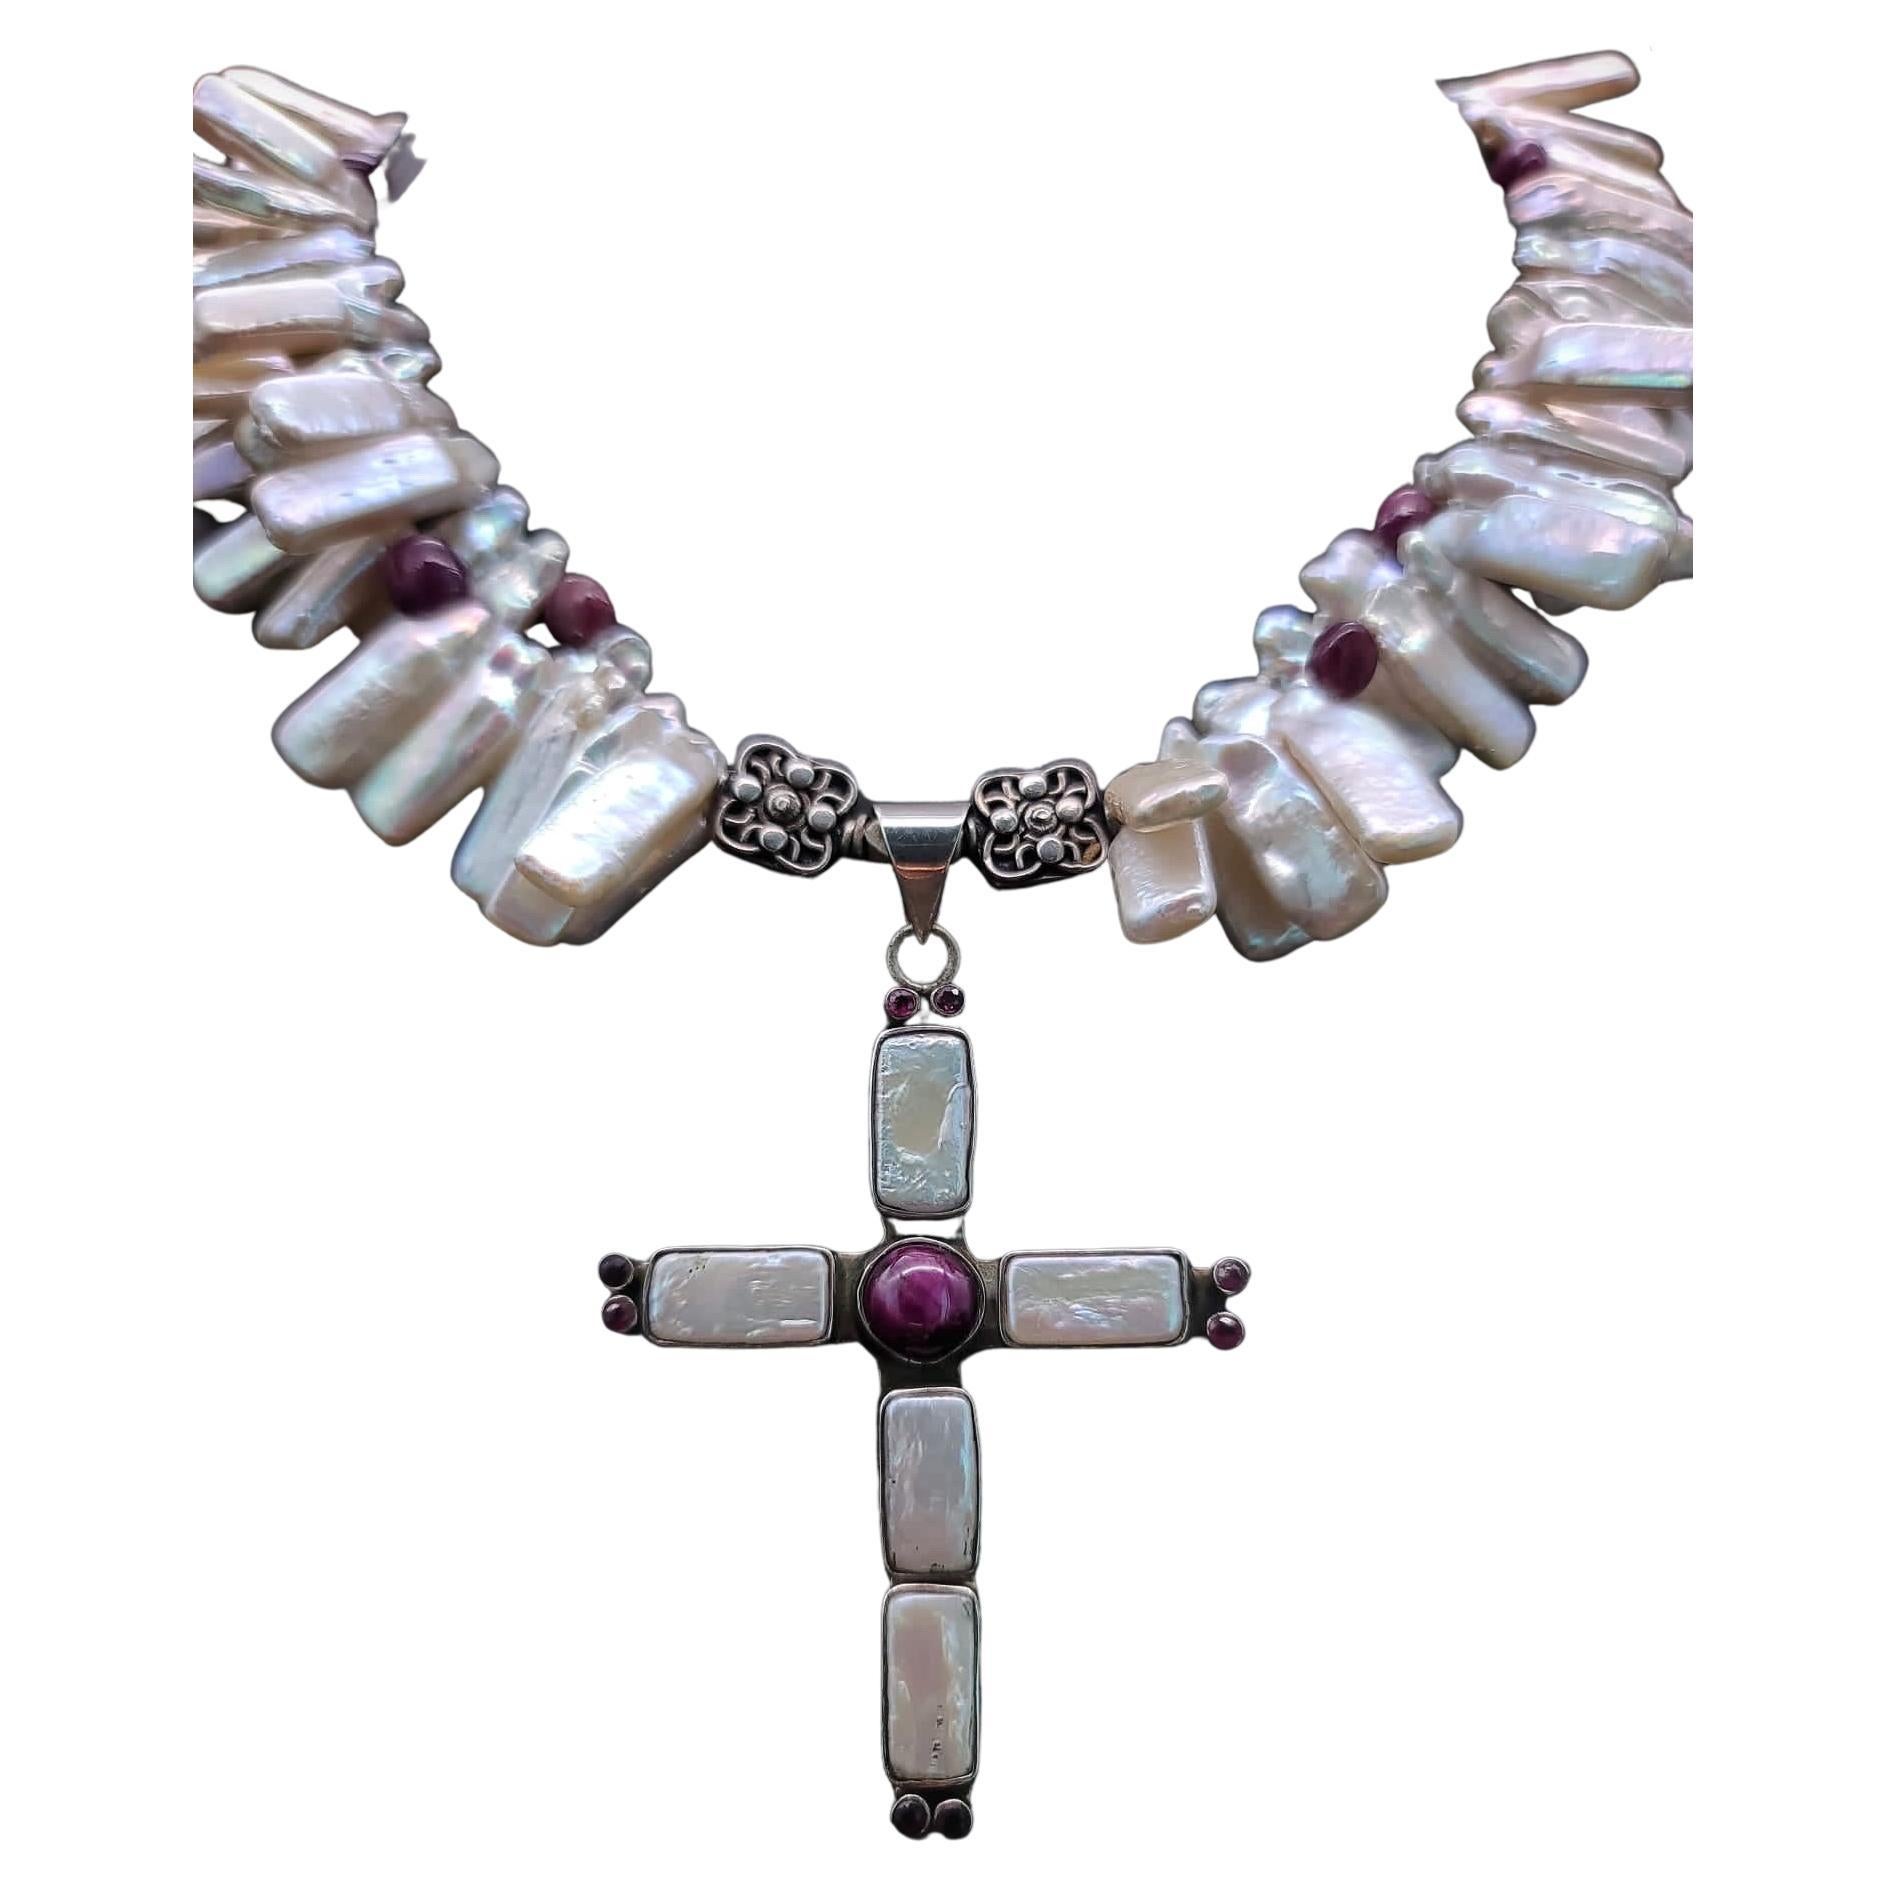 One-of-a-Kind

Not your ordinary cross necklace, but a flattering statement necklace of lustrous Pearls and Rubies paired with a lovely vintage cross.
Double-strand stick pearl and polished rubies make the perfect surround to an elegant cross of